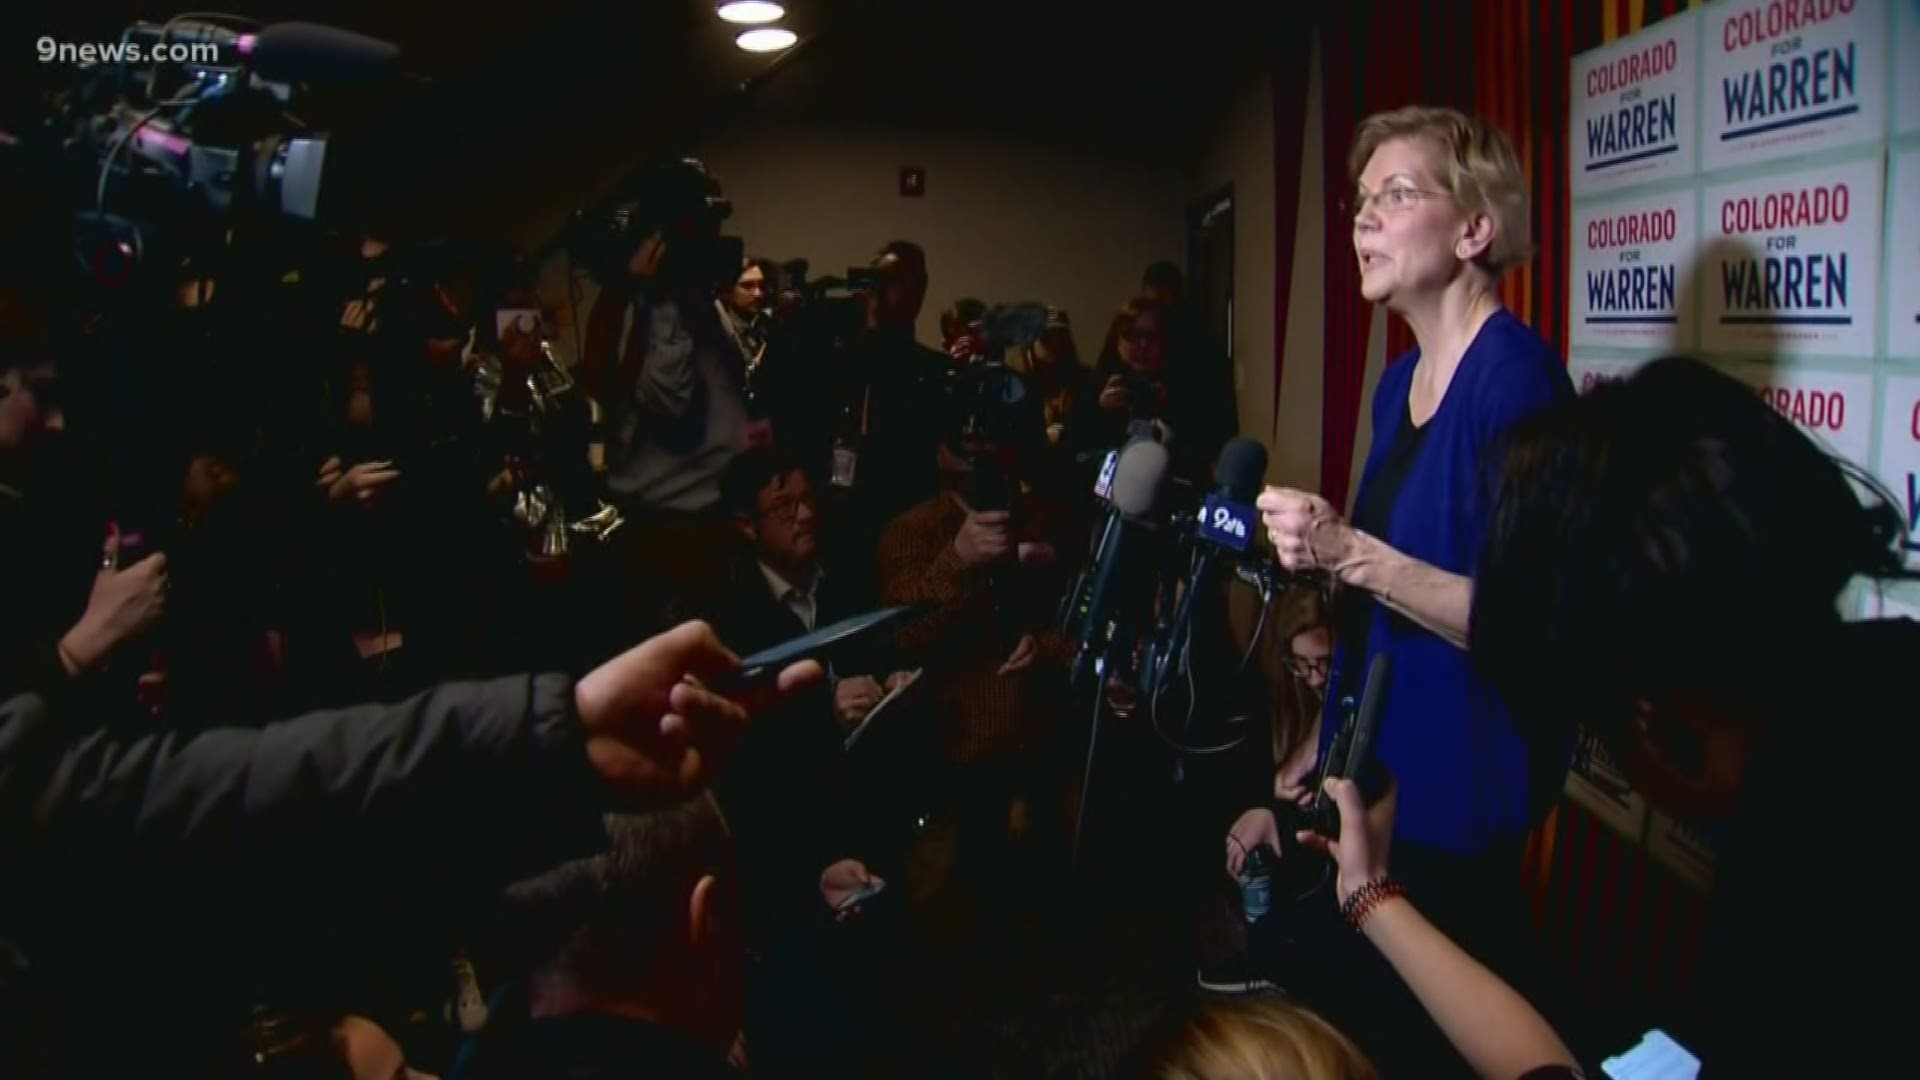 Warren called Michael Bloomberg "the riskiest candidate" while speaking to the media after the event.